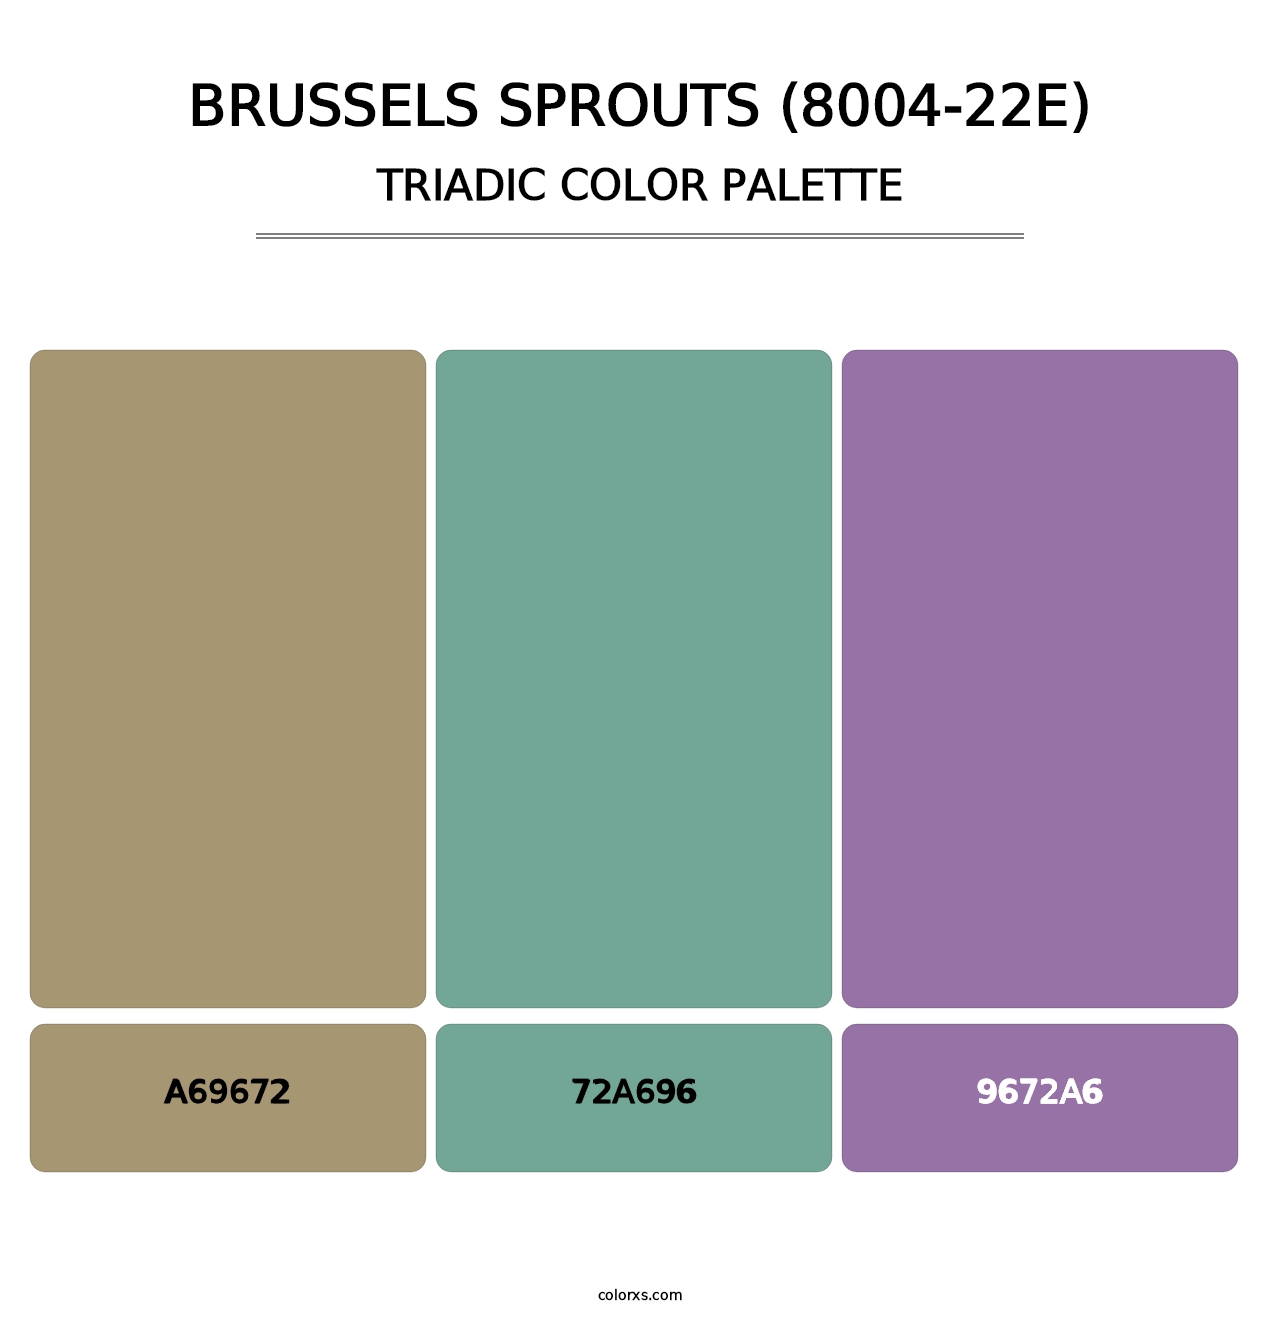 Brussels Sprouts (8004-22E) - Triadic Color Palette